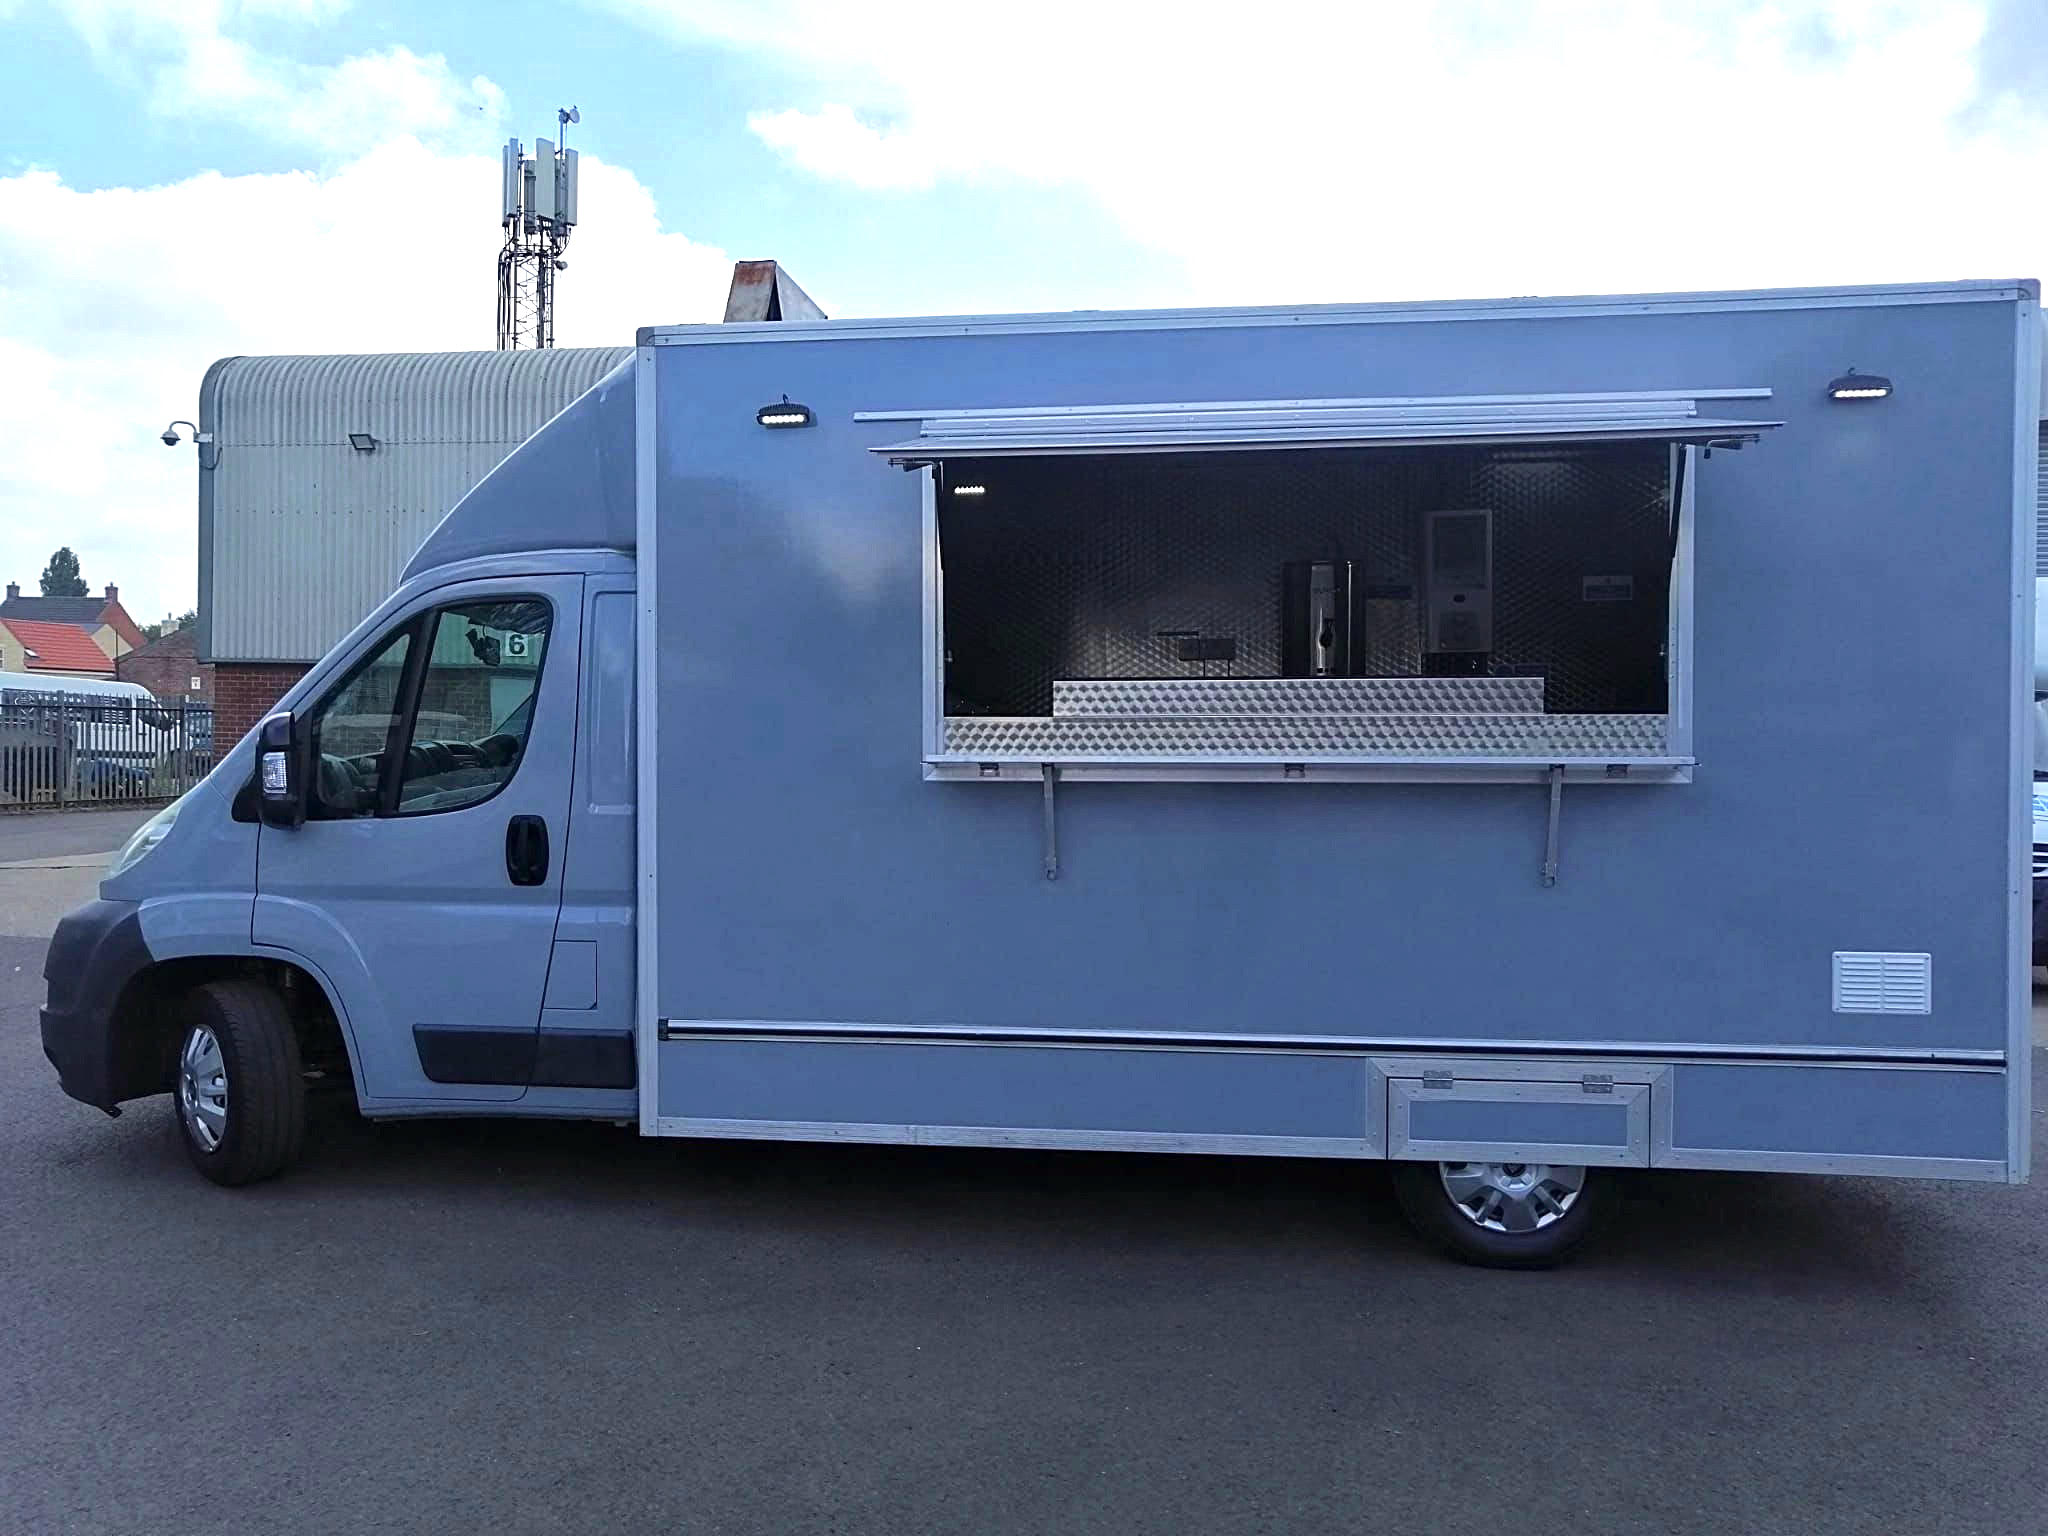 Secondhand and | Catering Vehicles